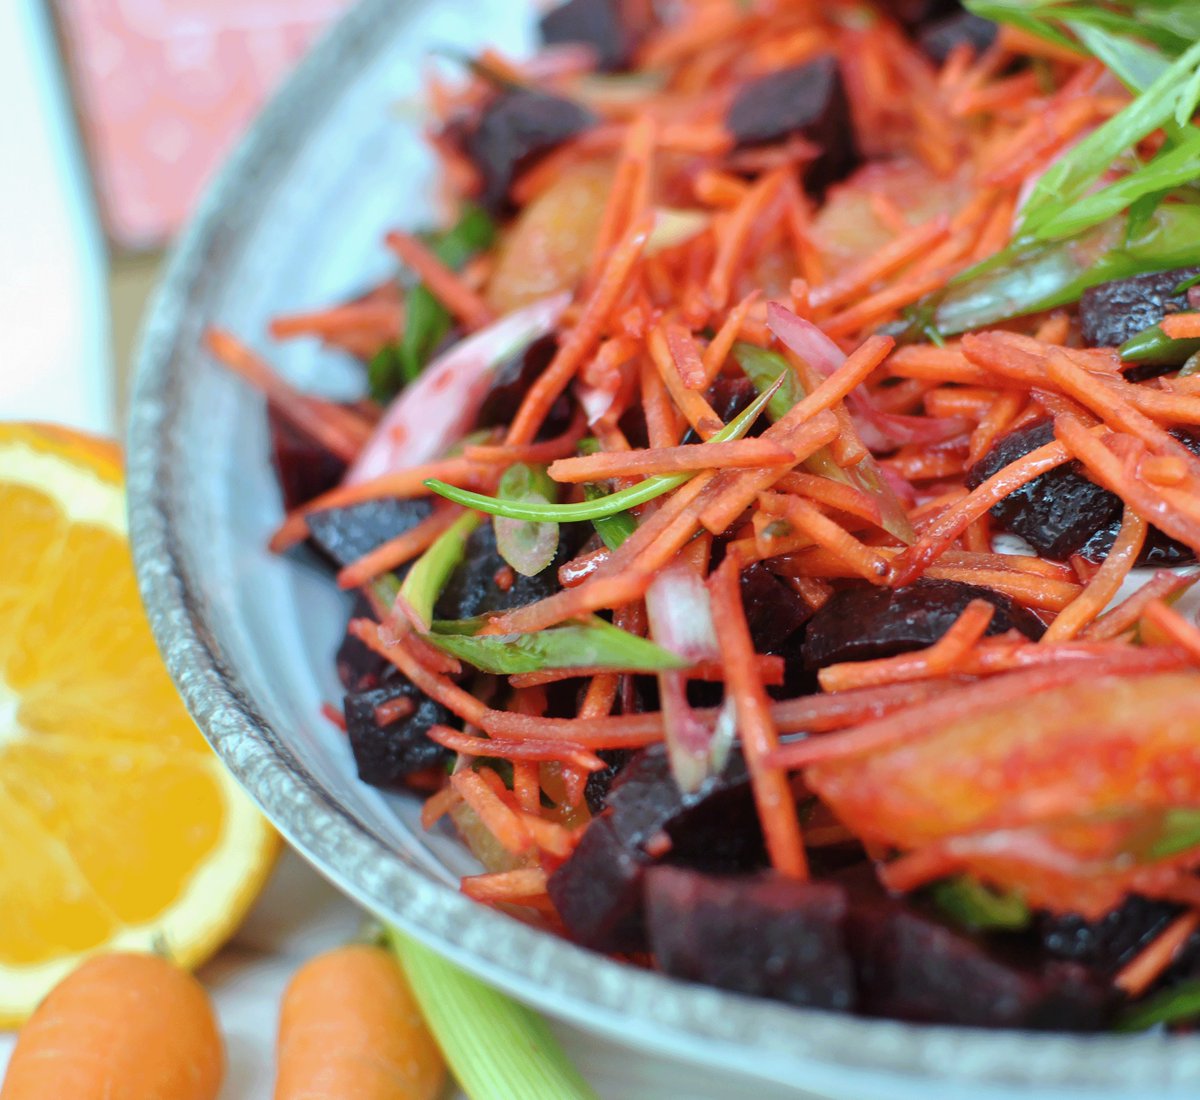 You know the score, new month, new salad!   A splash of sunshine in a bowl, our Beetroot, Carrot, Orange, and Spring Onion Salad ! 🥕🍊☀️
#saladofthemonth  #5aday #thepantry #teampantry #pantrykitchens